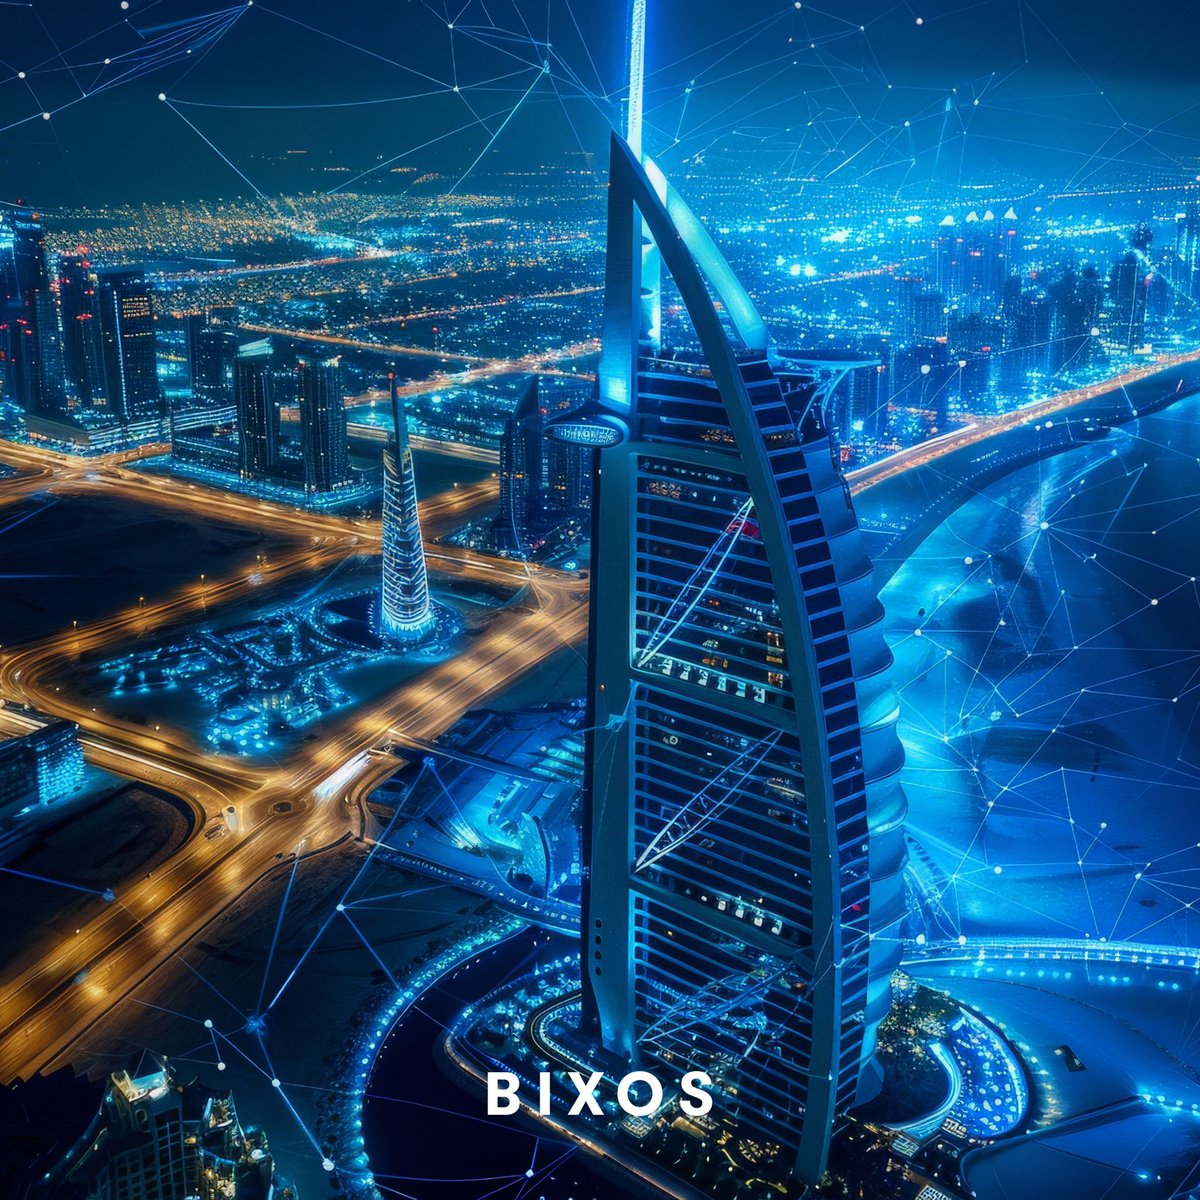 Preparing for the Ubxs Token Utiliy function! 🔥

Real estate tokezation begins with Ubxs Token 🏠

Tokenized real estate with UBXS Token from the United Arab Emirates will soon be listed on the Bixos Estate marketplace 🇦🇪 

#RWA #tokenized